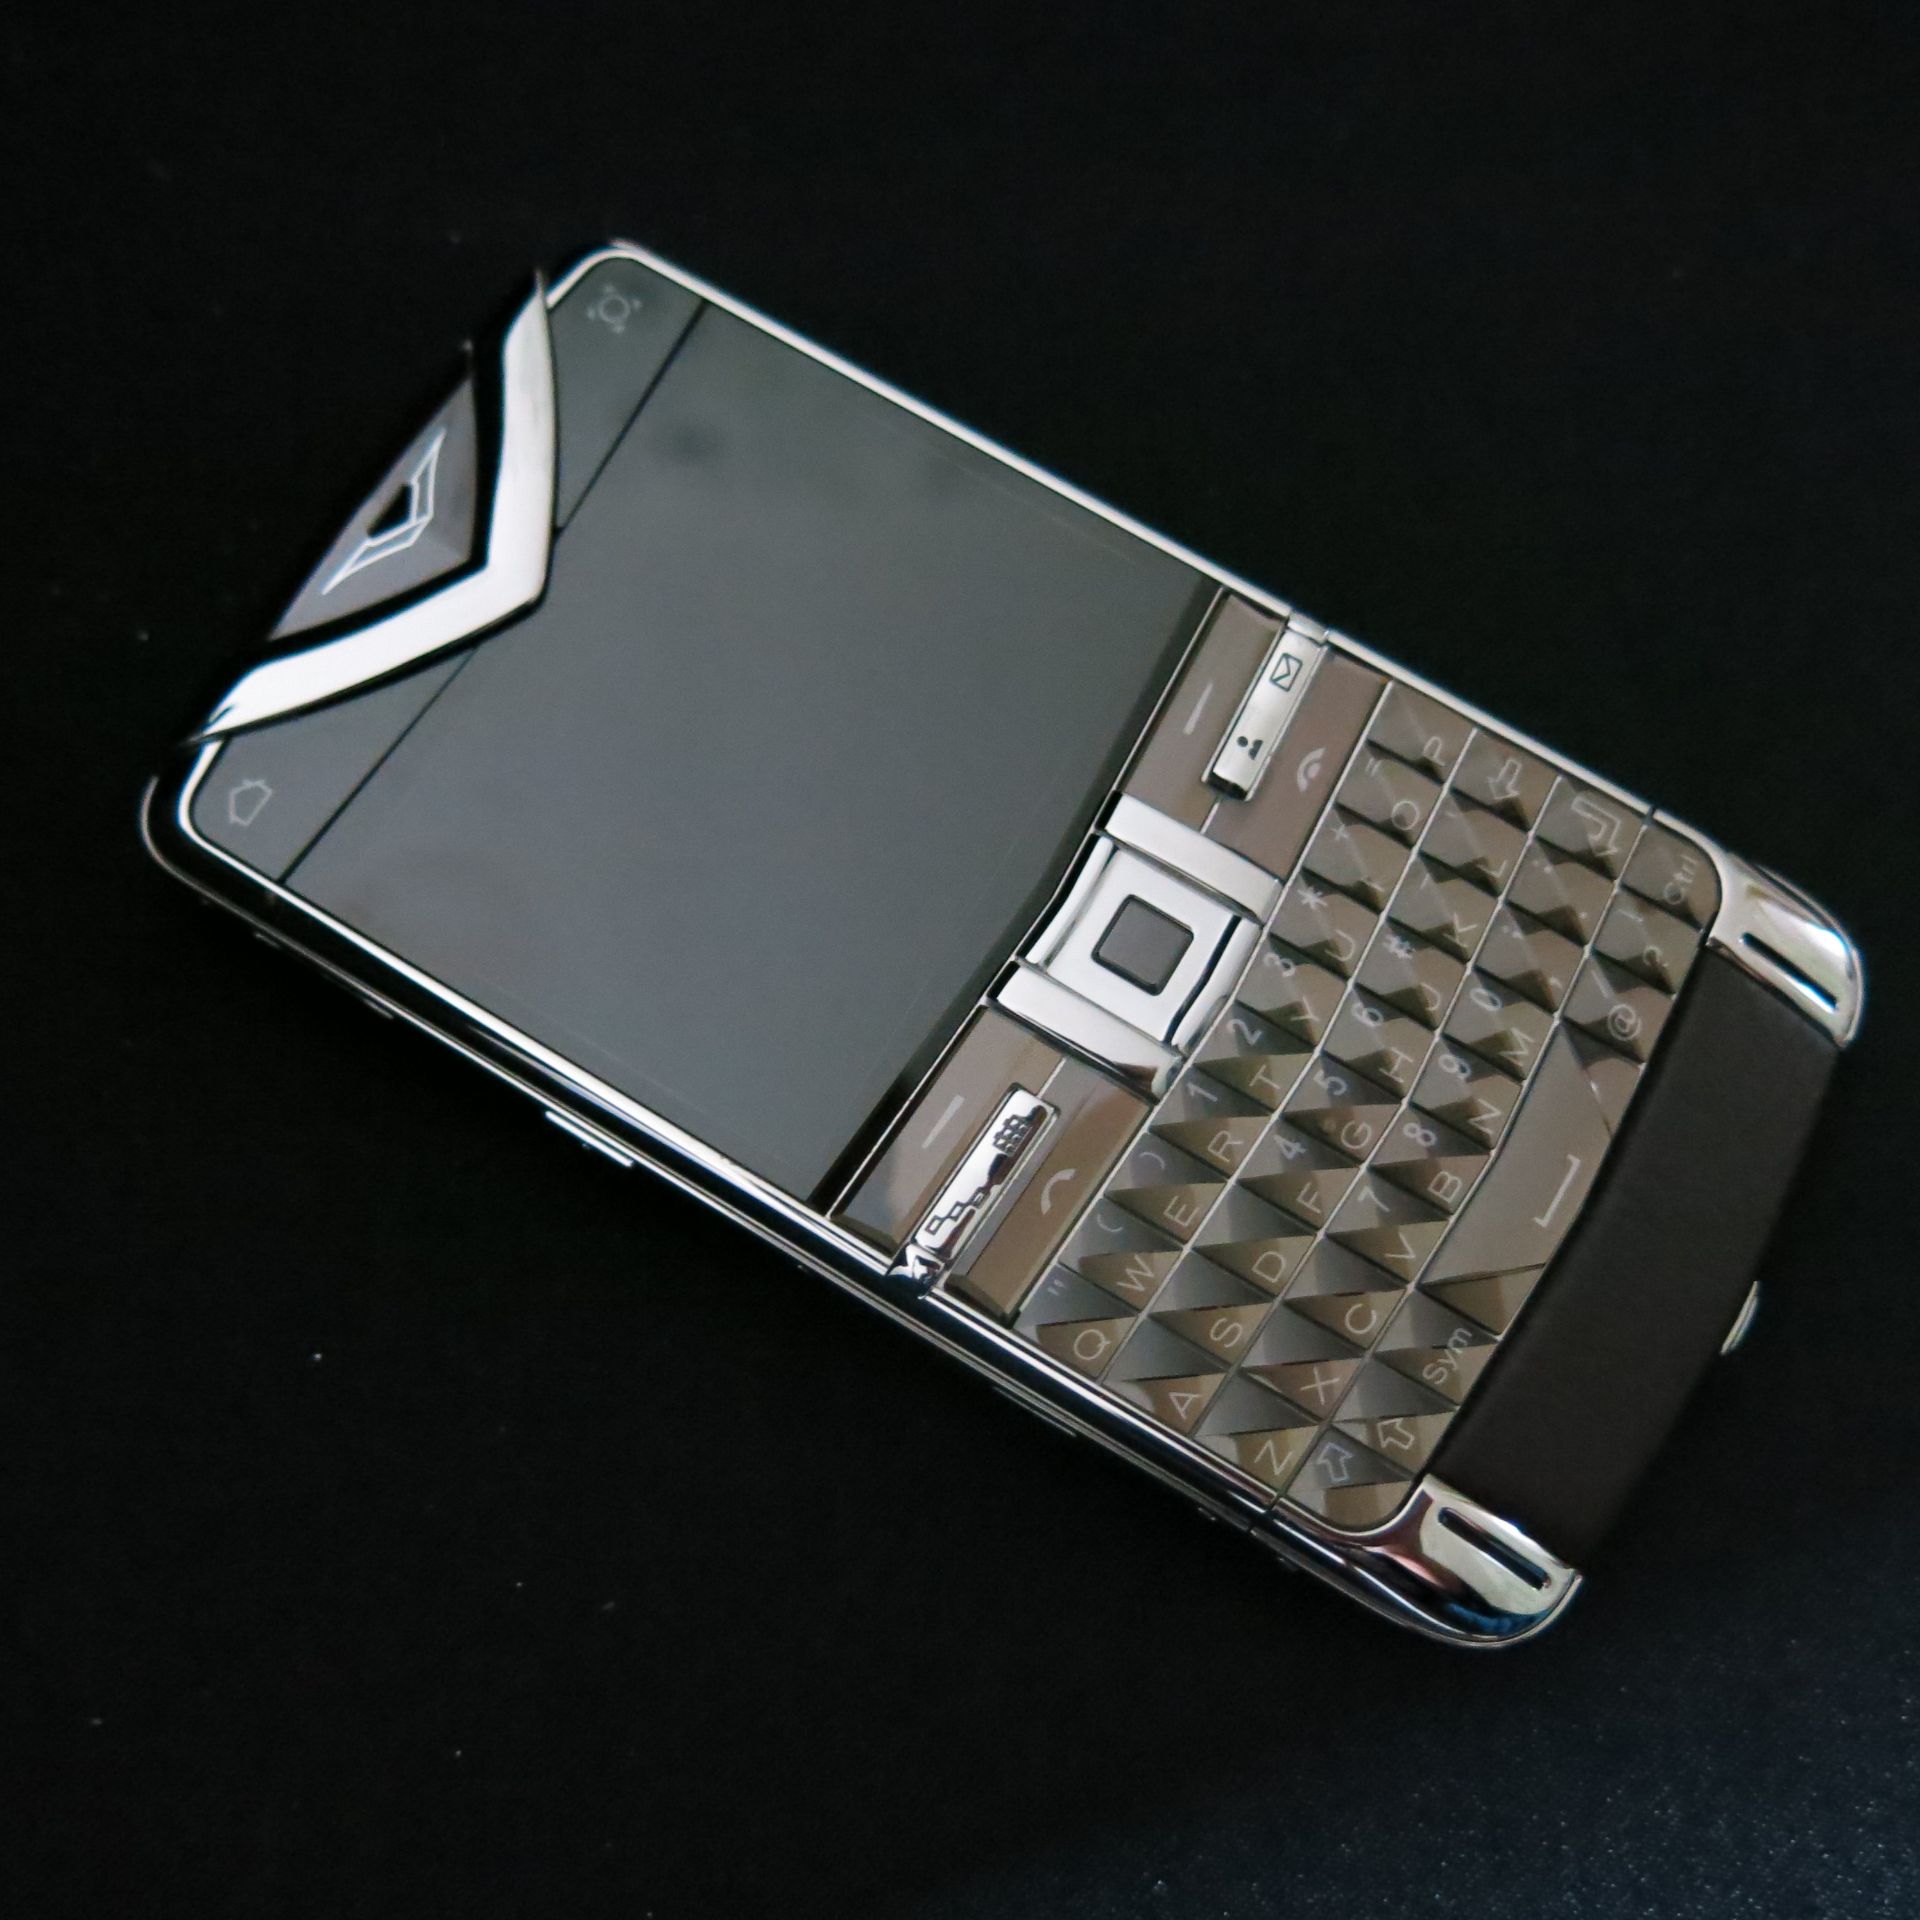 Entire Contents of the VERTU Museum Collection to Include: 105 Various Iconic Phones & Appearance - Image 70 of 106